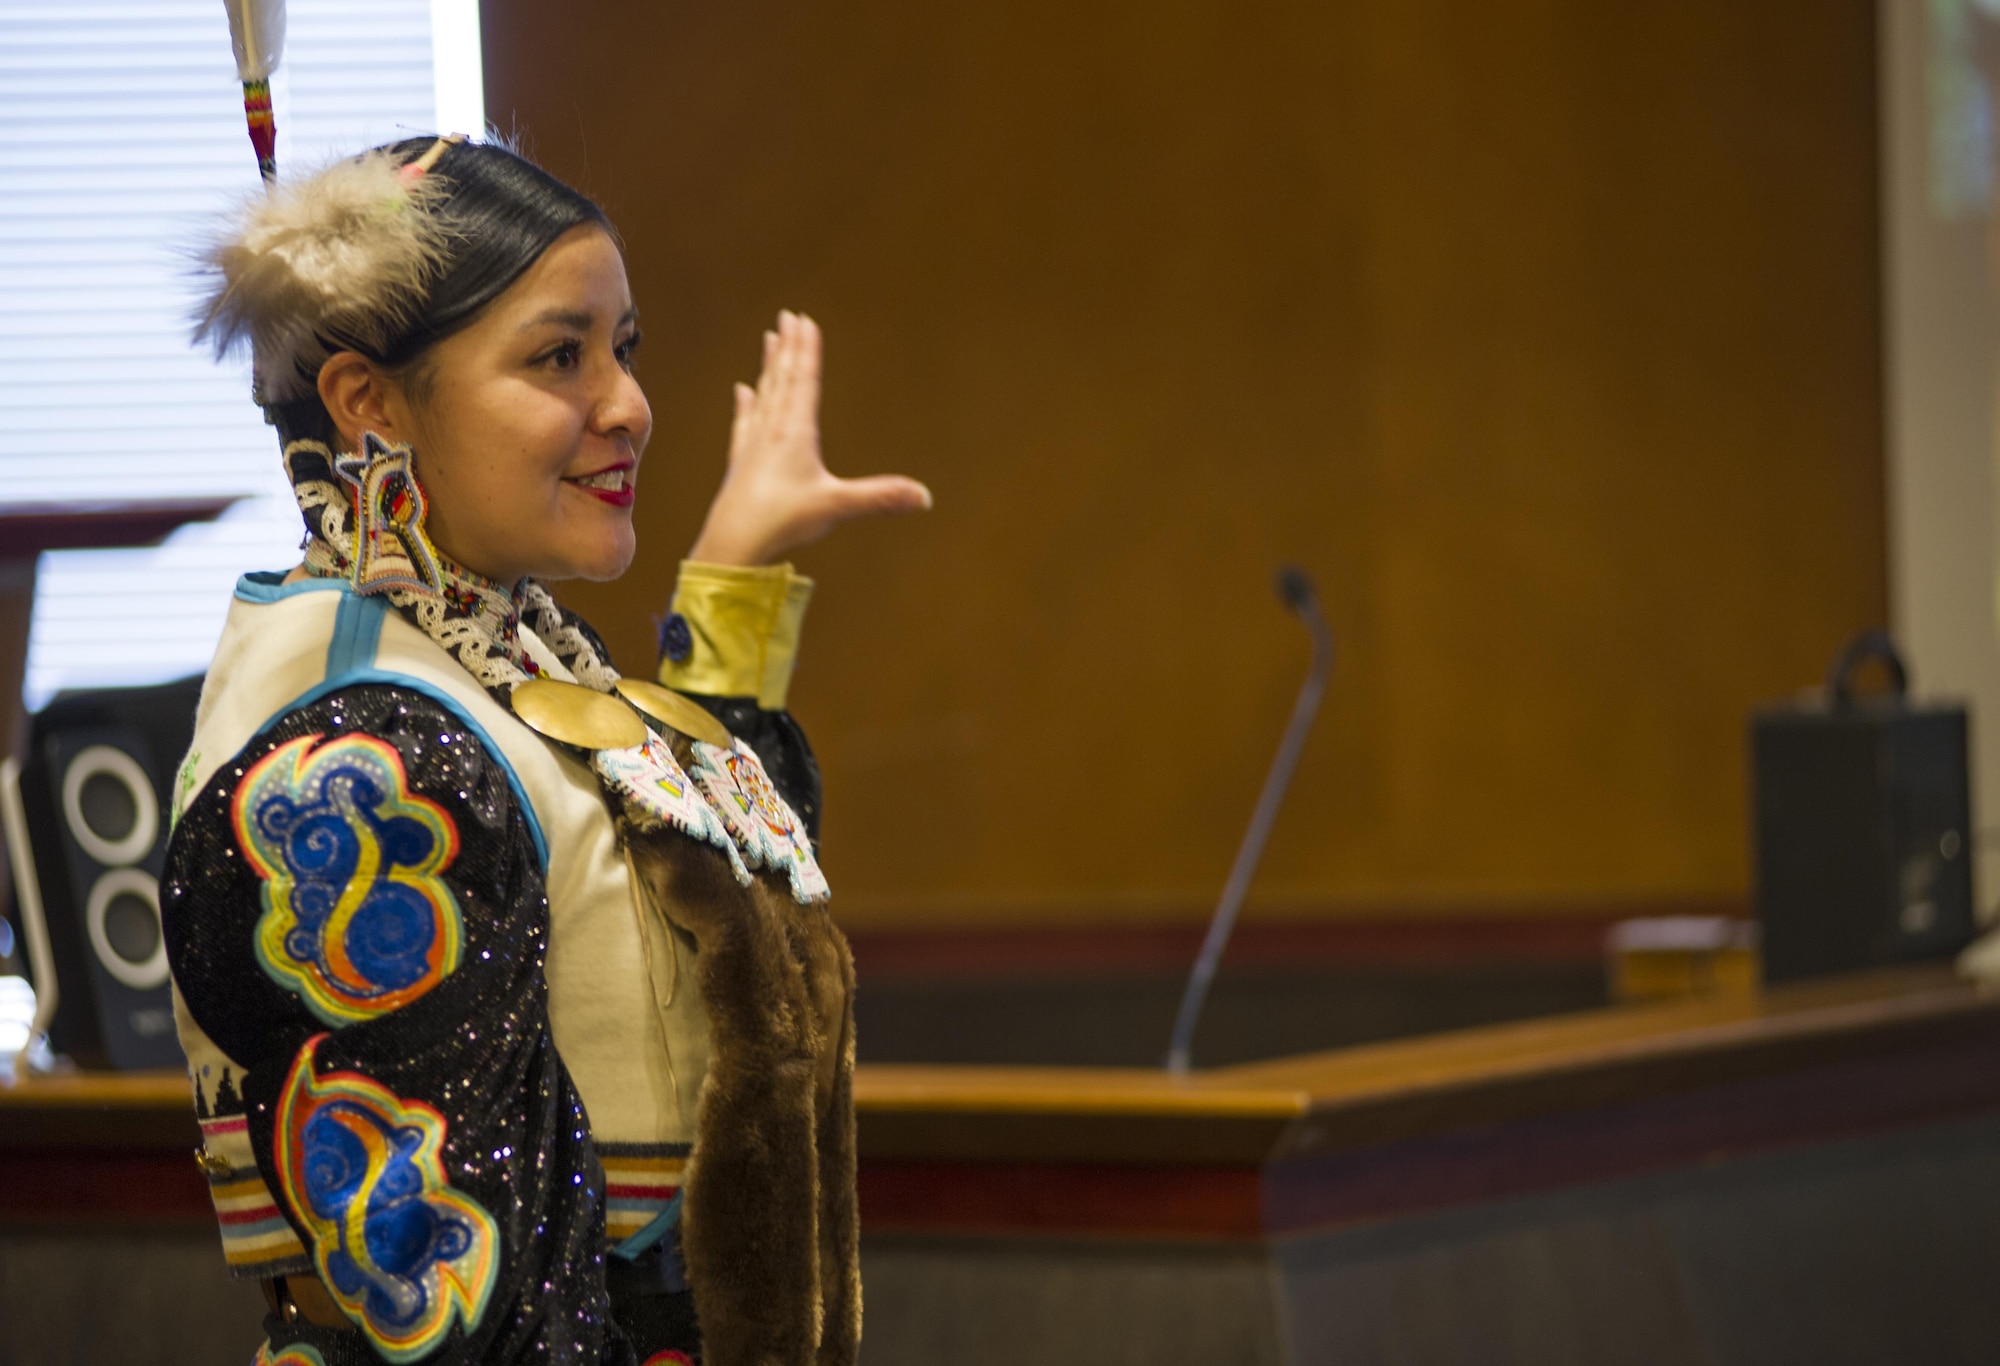 Staff Sgt. Antonia Thomas, 310th Operations Support Squadron, teaches a class on Native American Culture during Schriever's Diversity Day